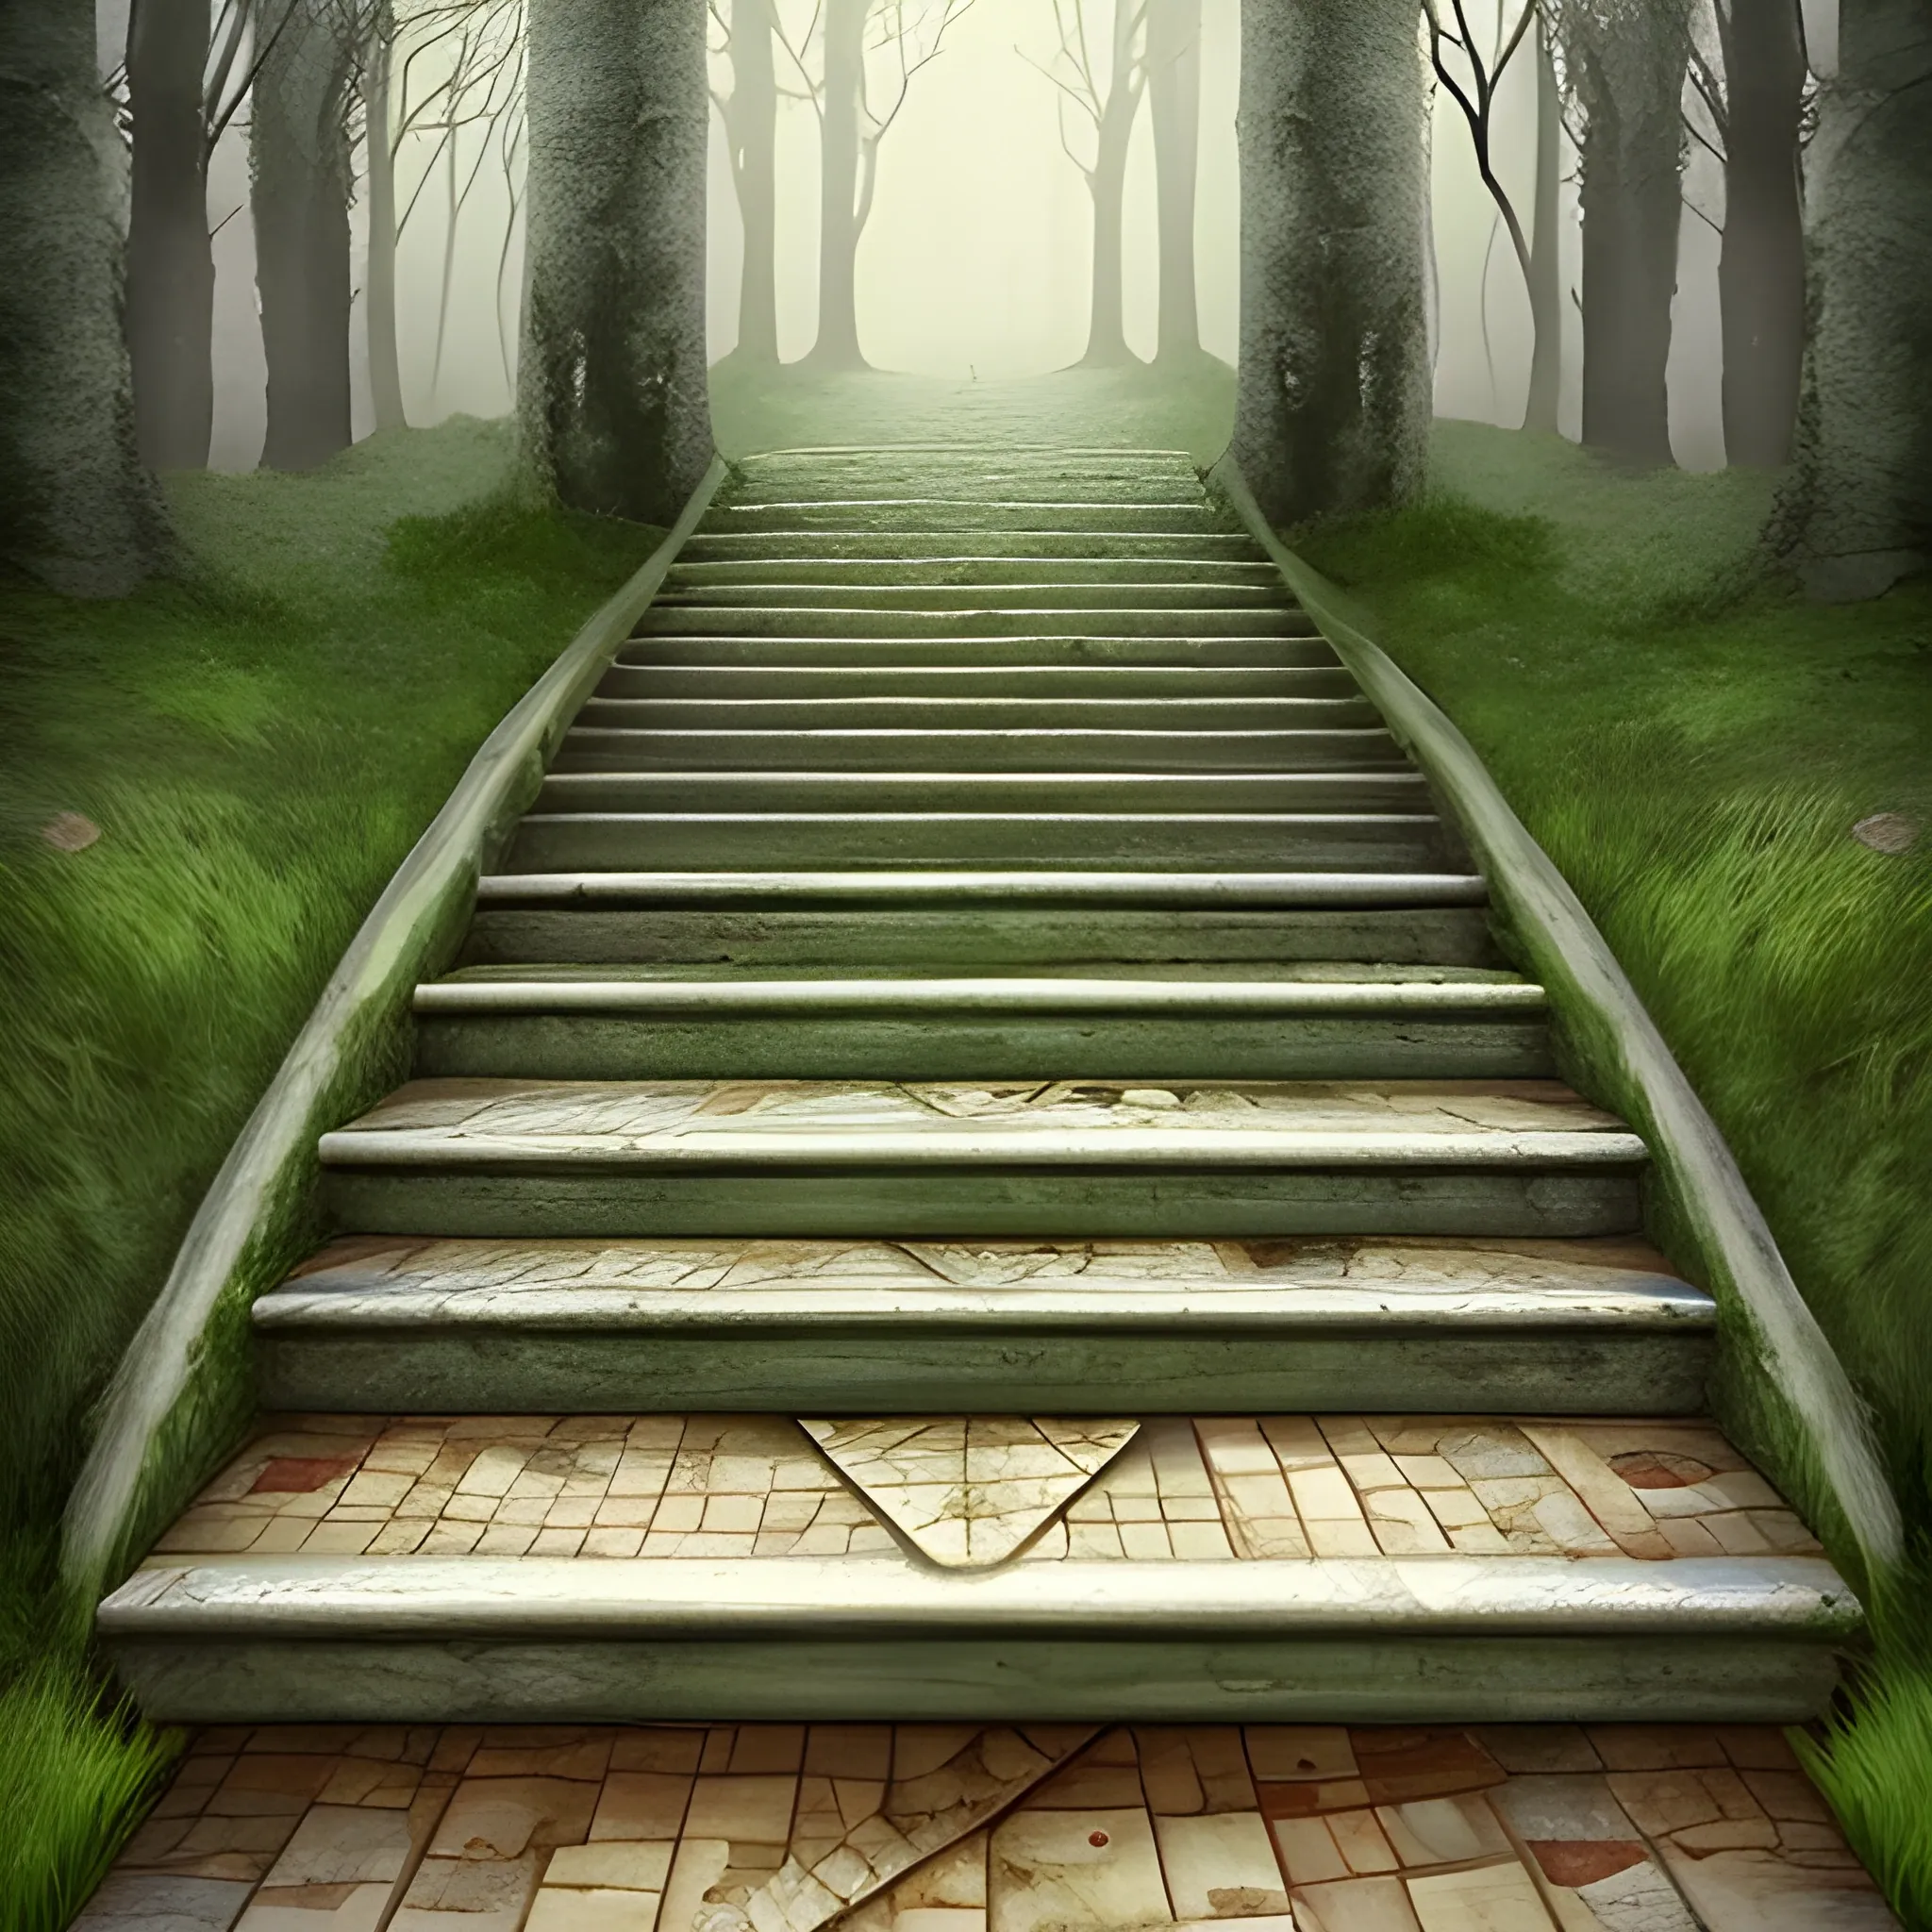 fantasy paper looking like stairs, landscape fond dreamy